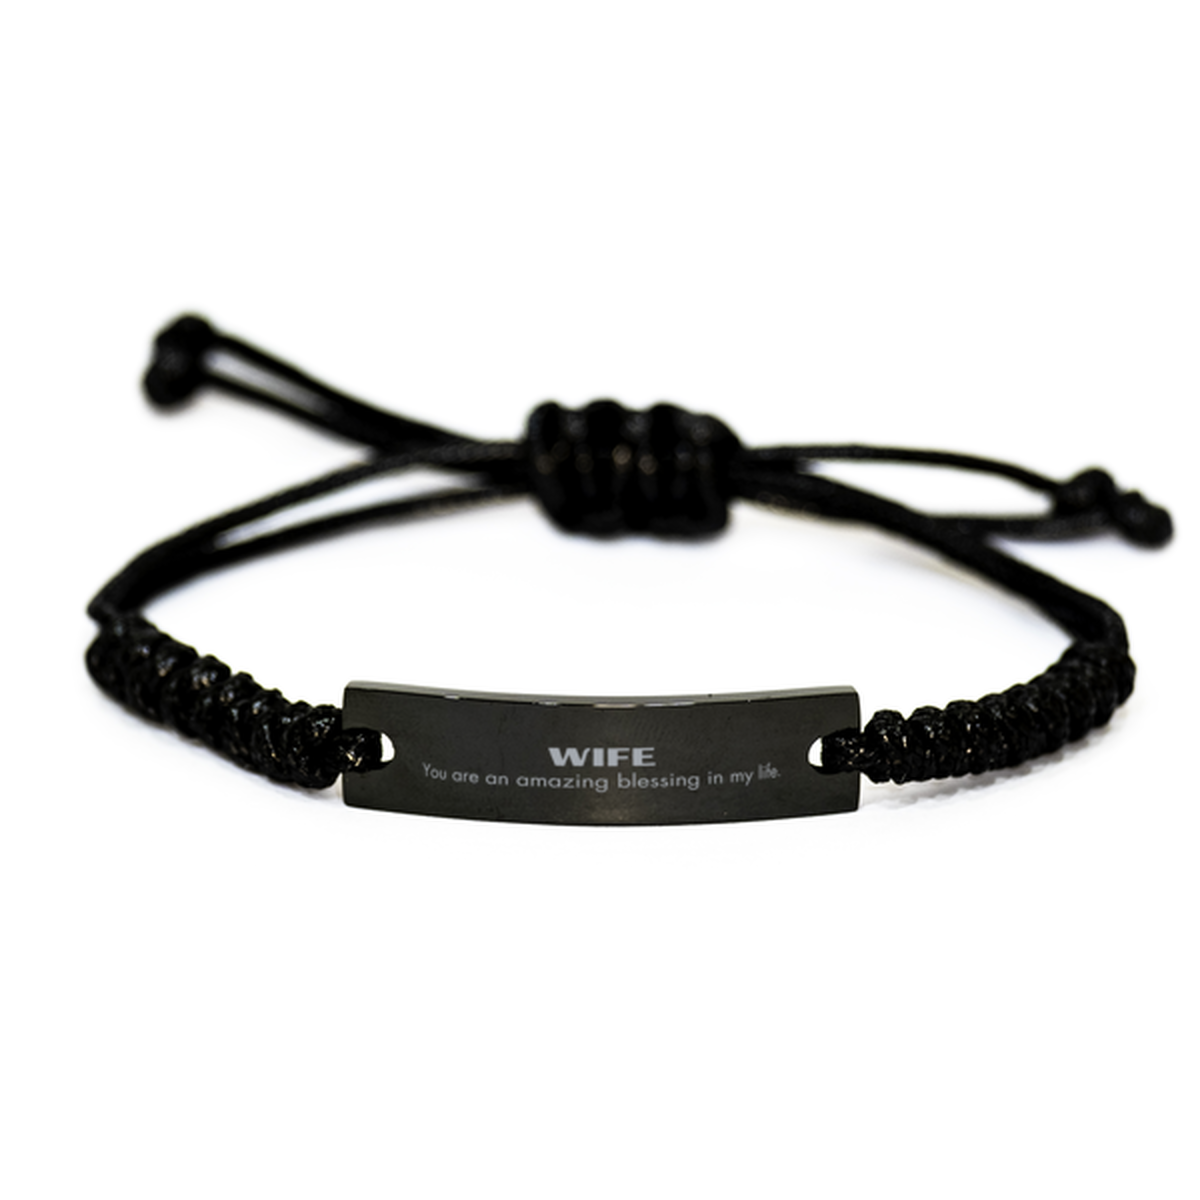 Wife Black Rope Bracelet, You are an amazing blessing in my life, Thank You Gifts For Wife, Inspirational Birthday Christmas Unique Gifts For Wife